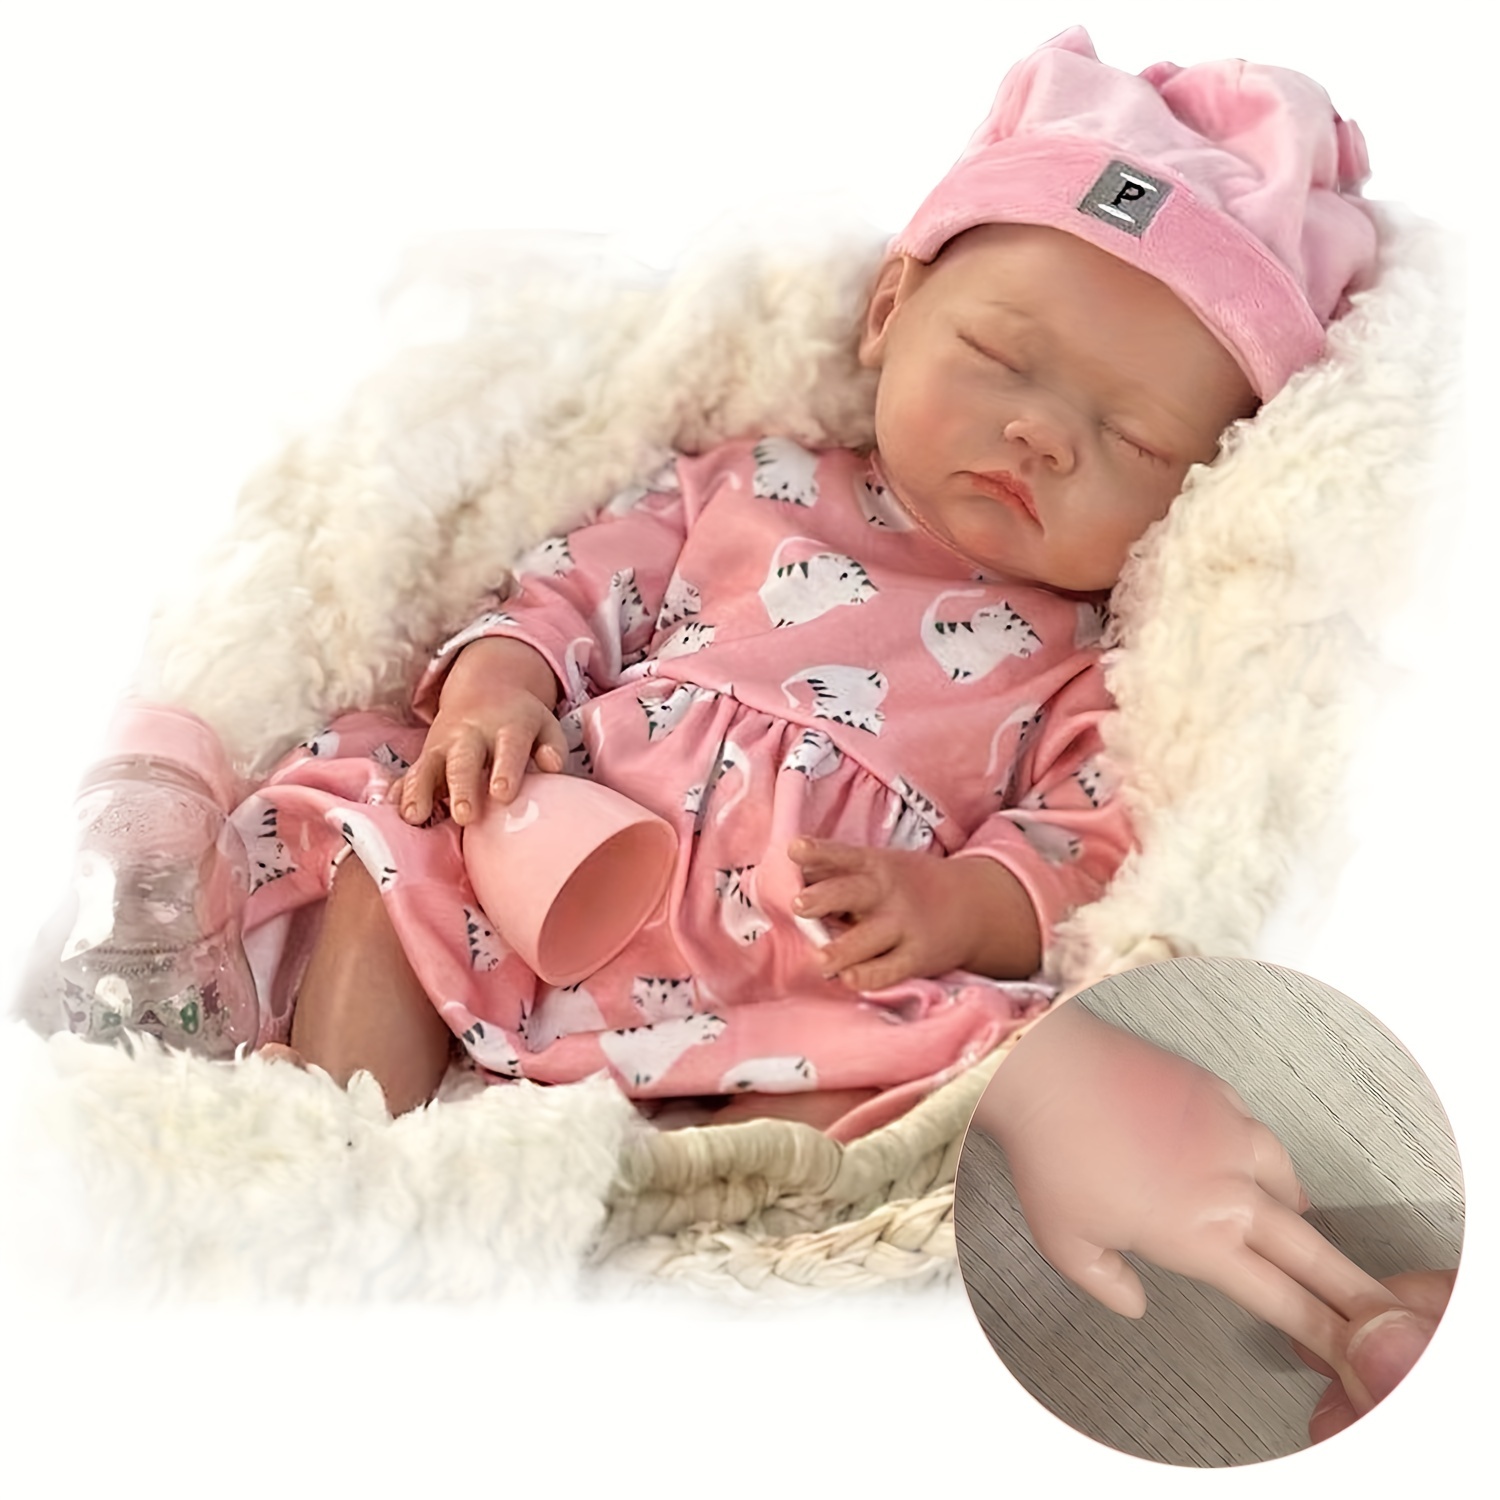 17.72inch Sleeping Girl Silicone Reborn Dolls Full Body Soft Solid Silicone  Bebe Reborn Doll Artist Painting Baby Dolls For Family's Gift Corpo De Sil